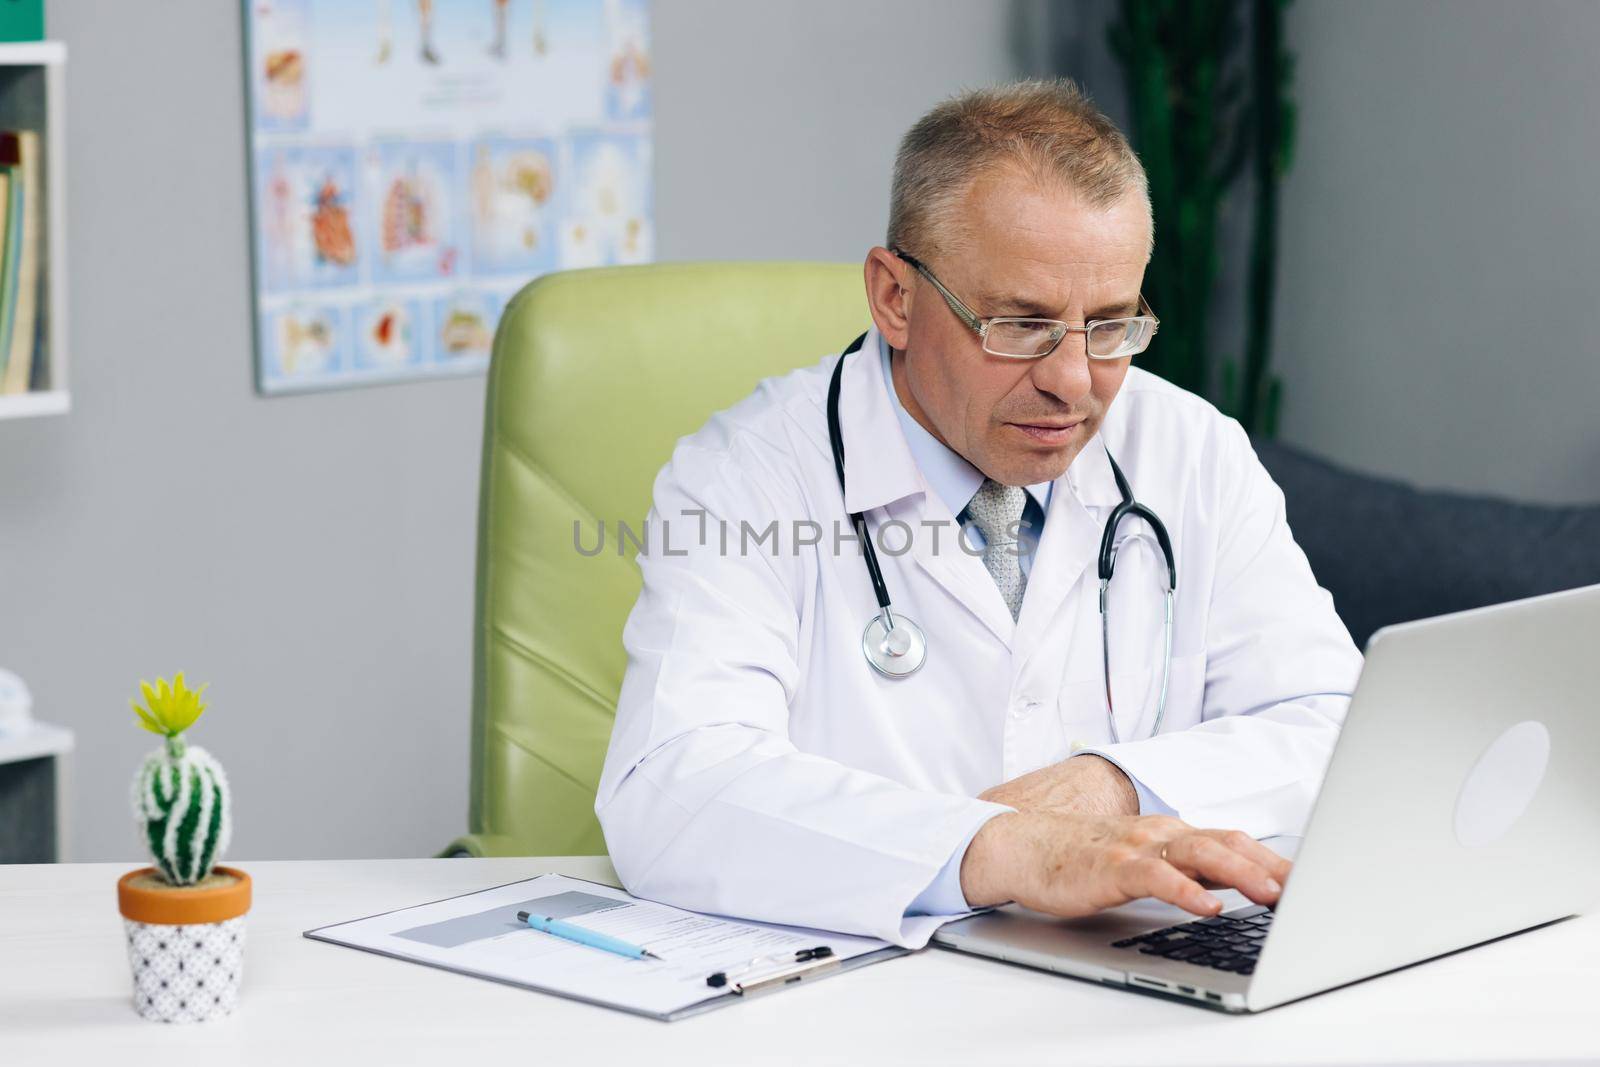 Physician in White Lab Coat is Browsing Medical History Behind a Desk in Hospital Office. Calm Family Medical Doctor in Glasses is Working on a Laptop Computer in a Health Clinic by uflypro